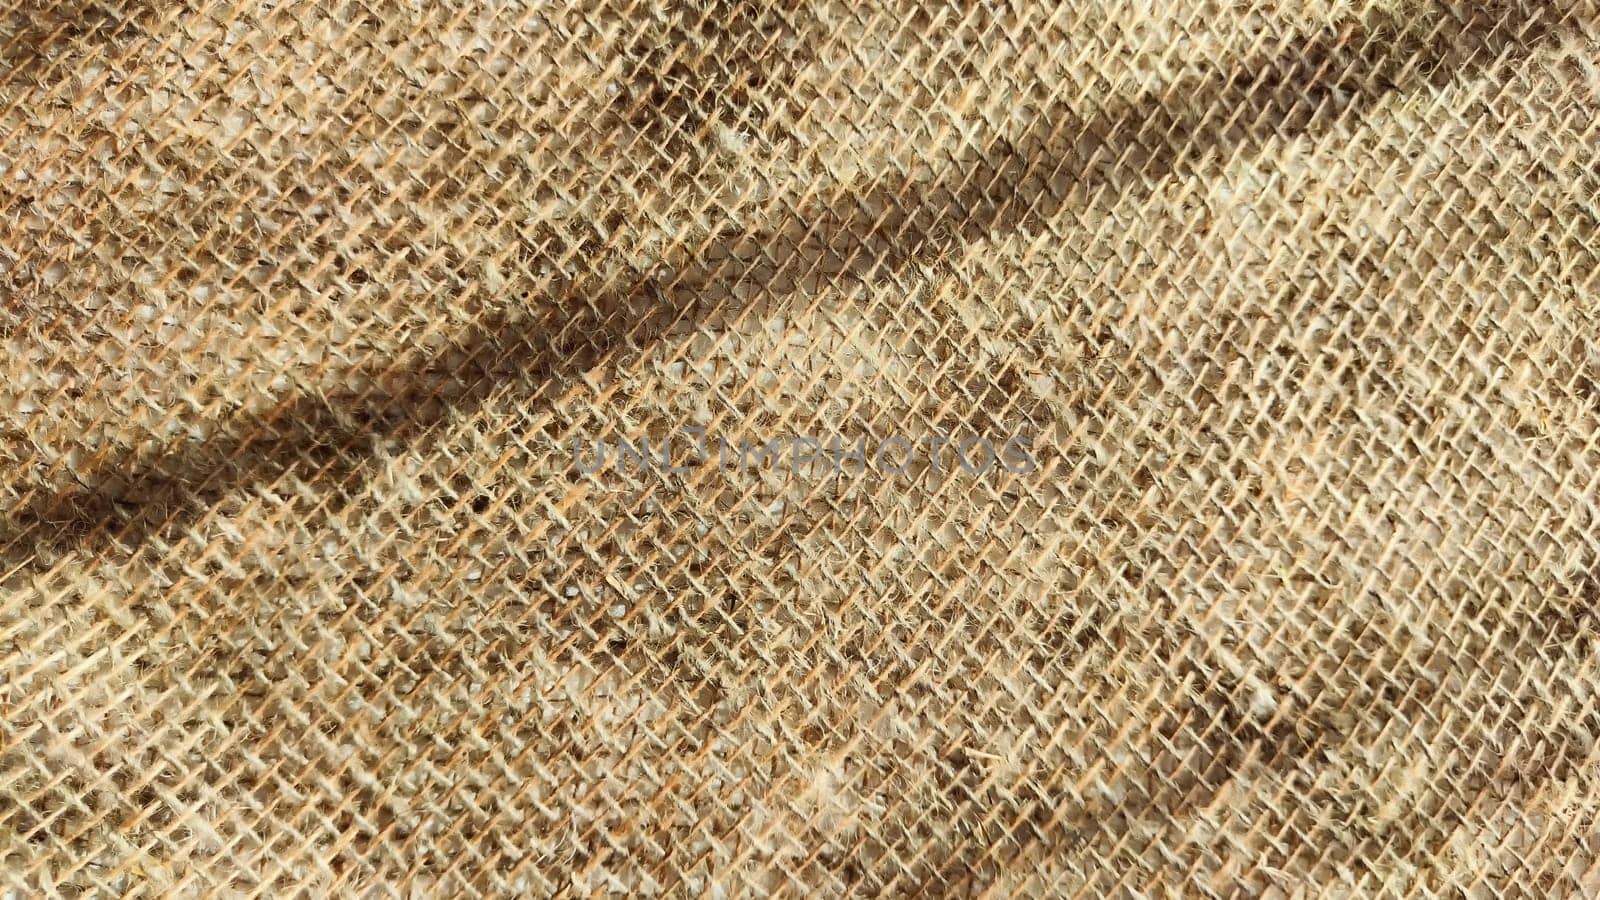 Natural fabric texture, frame and background of burlap. Rough crumpled burlap background. Selective focus